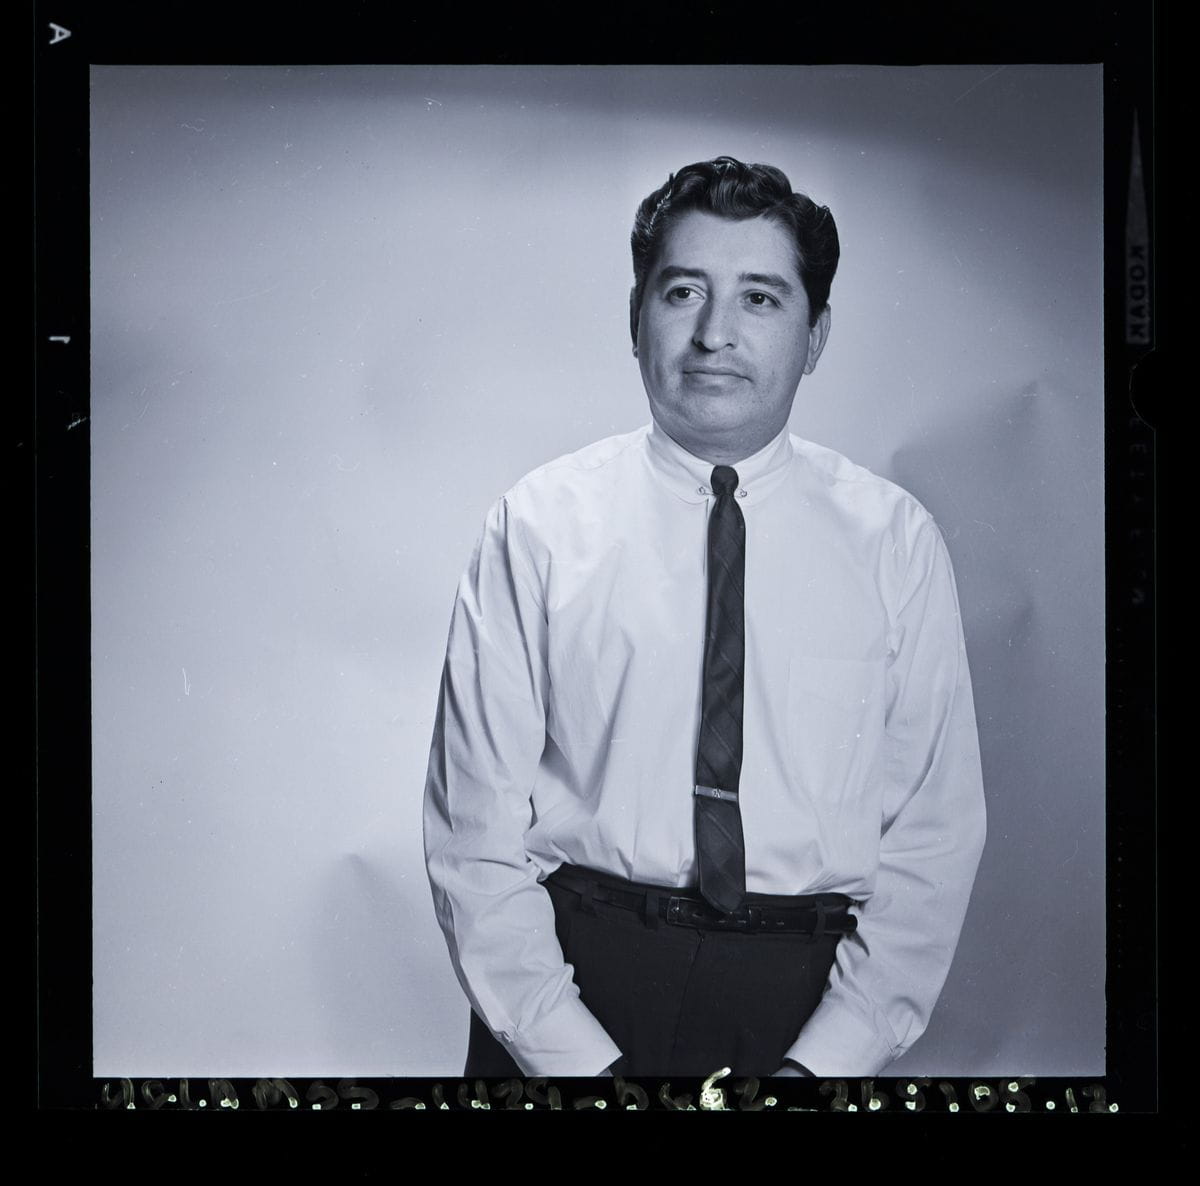 Ruben Salazar in his typical suit and tie.